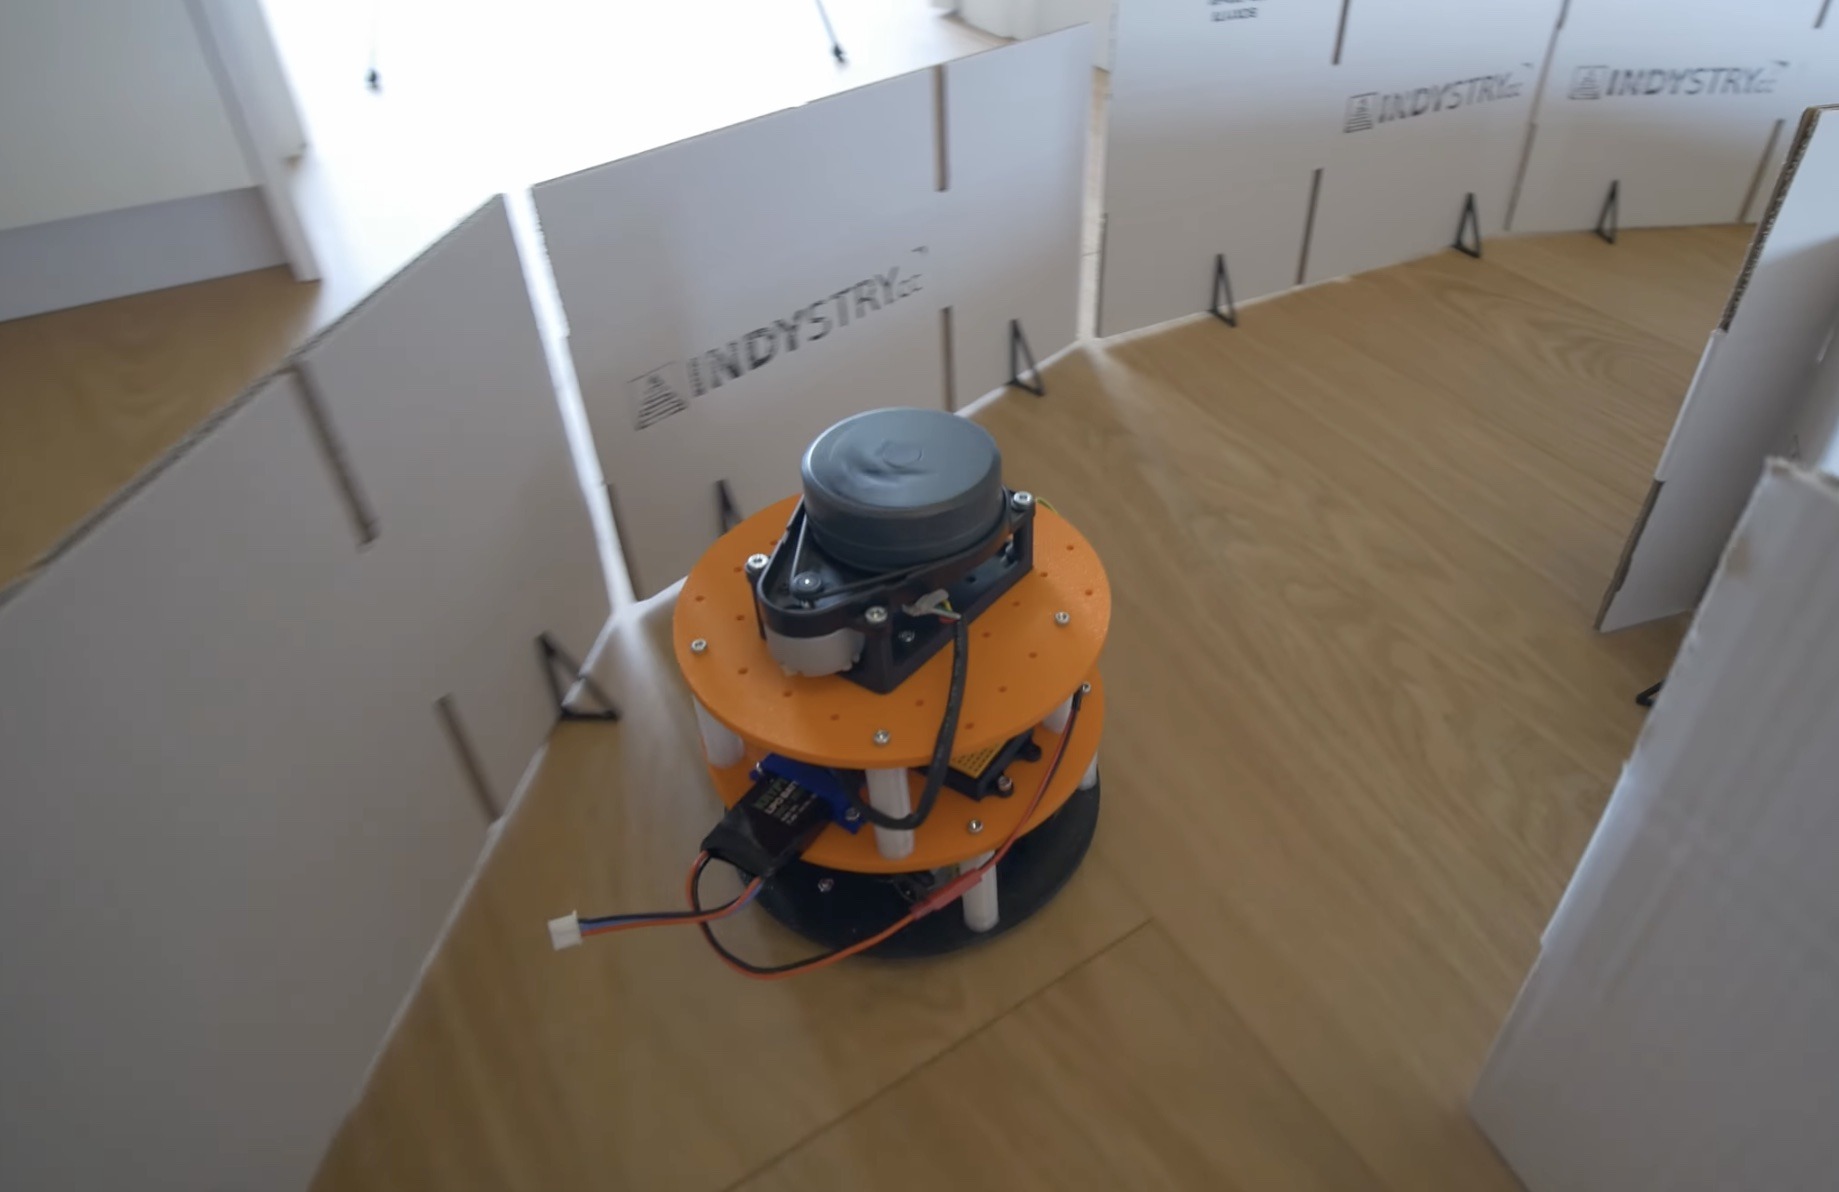 Teaching an Arduino UNO R4-powered robot to navigate obstacles autonomously